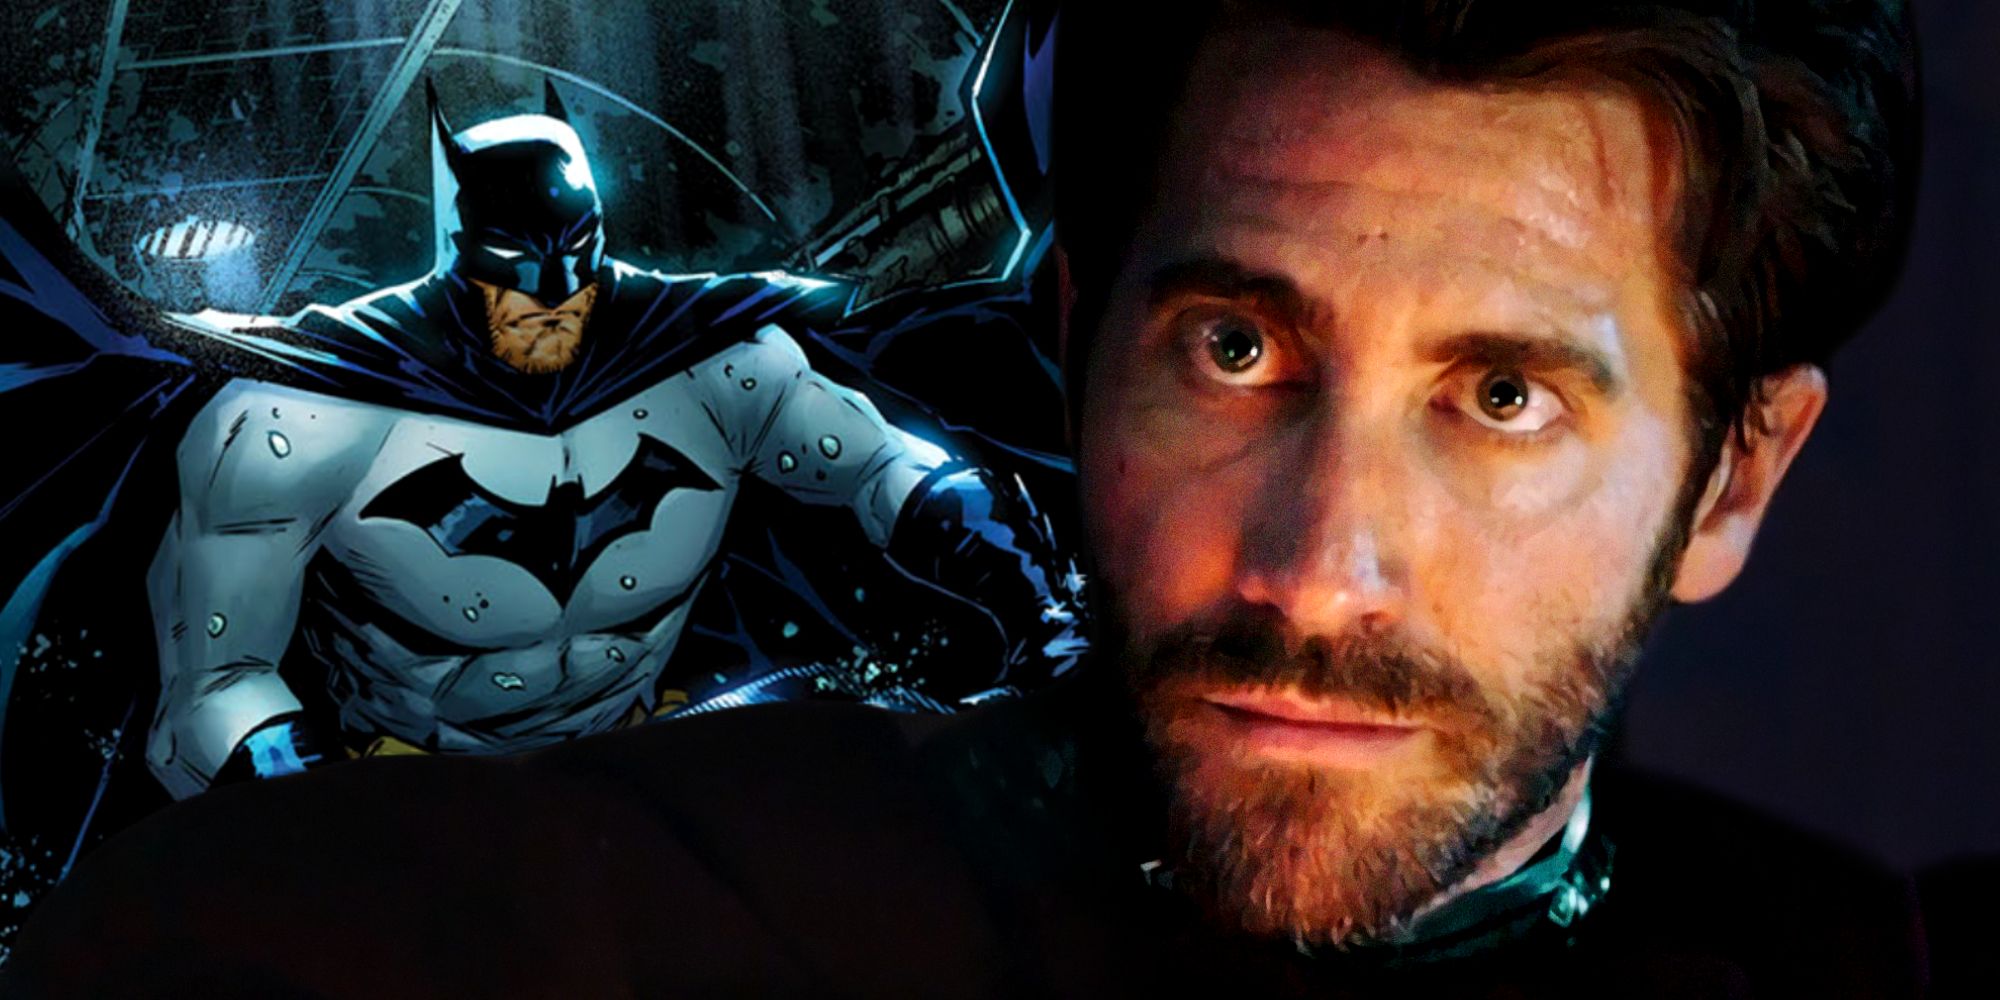 jake-gyllenhaal-becomes-the-dcu’s-batman-in-gorgeous-art-following-the-actor’s-recent-comments